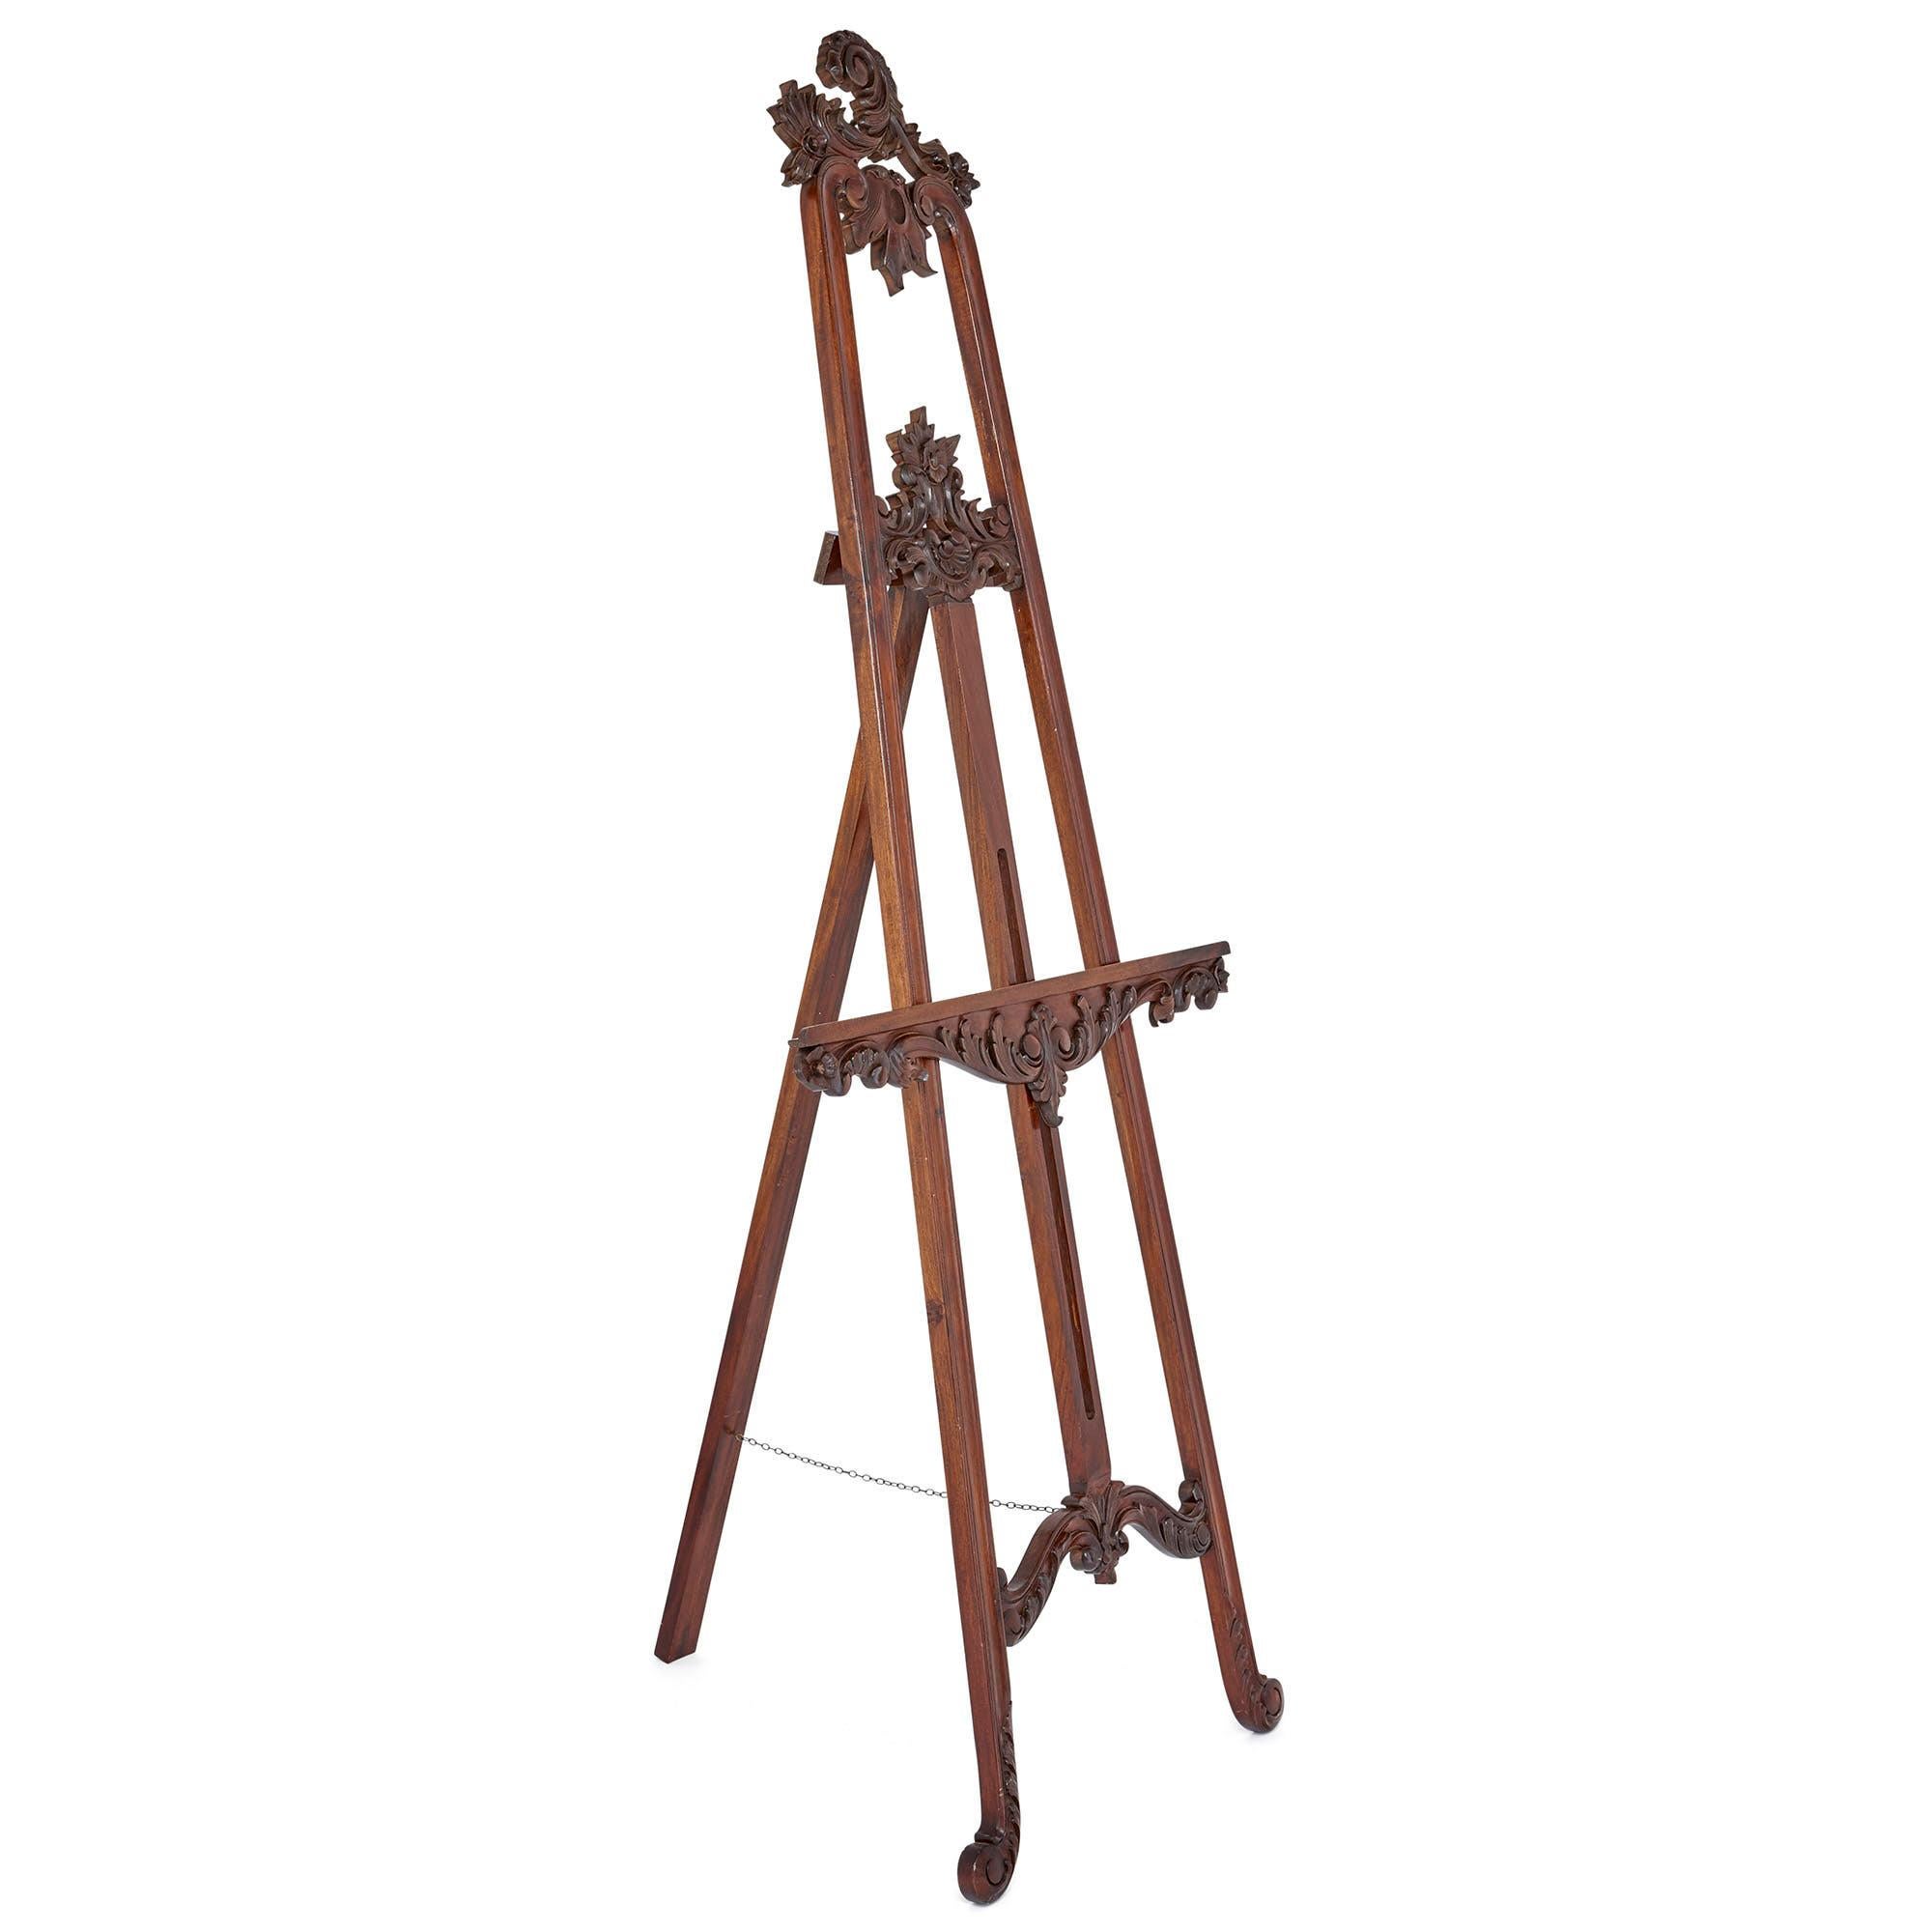 This beautiful artist’s easel was created in England in circa 1900, in the early 20th century. The easel is of tripod form, being set on three supports. Its feet and top are scrolled. The easel features a horizontal member, upon which the artist’s